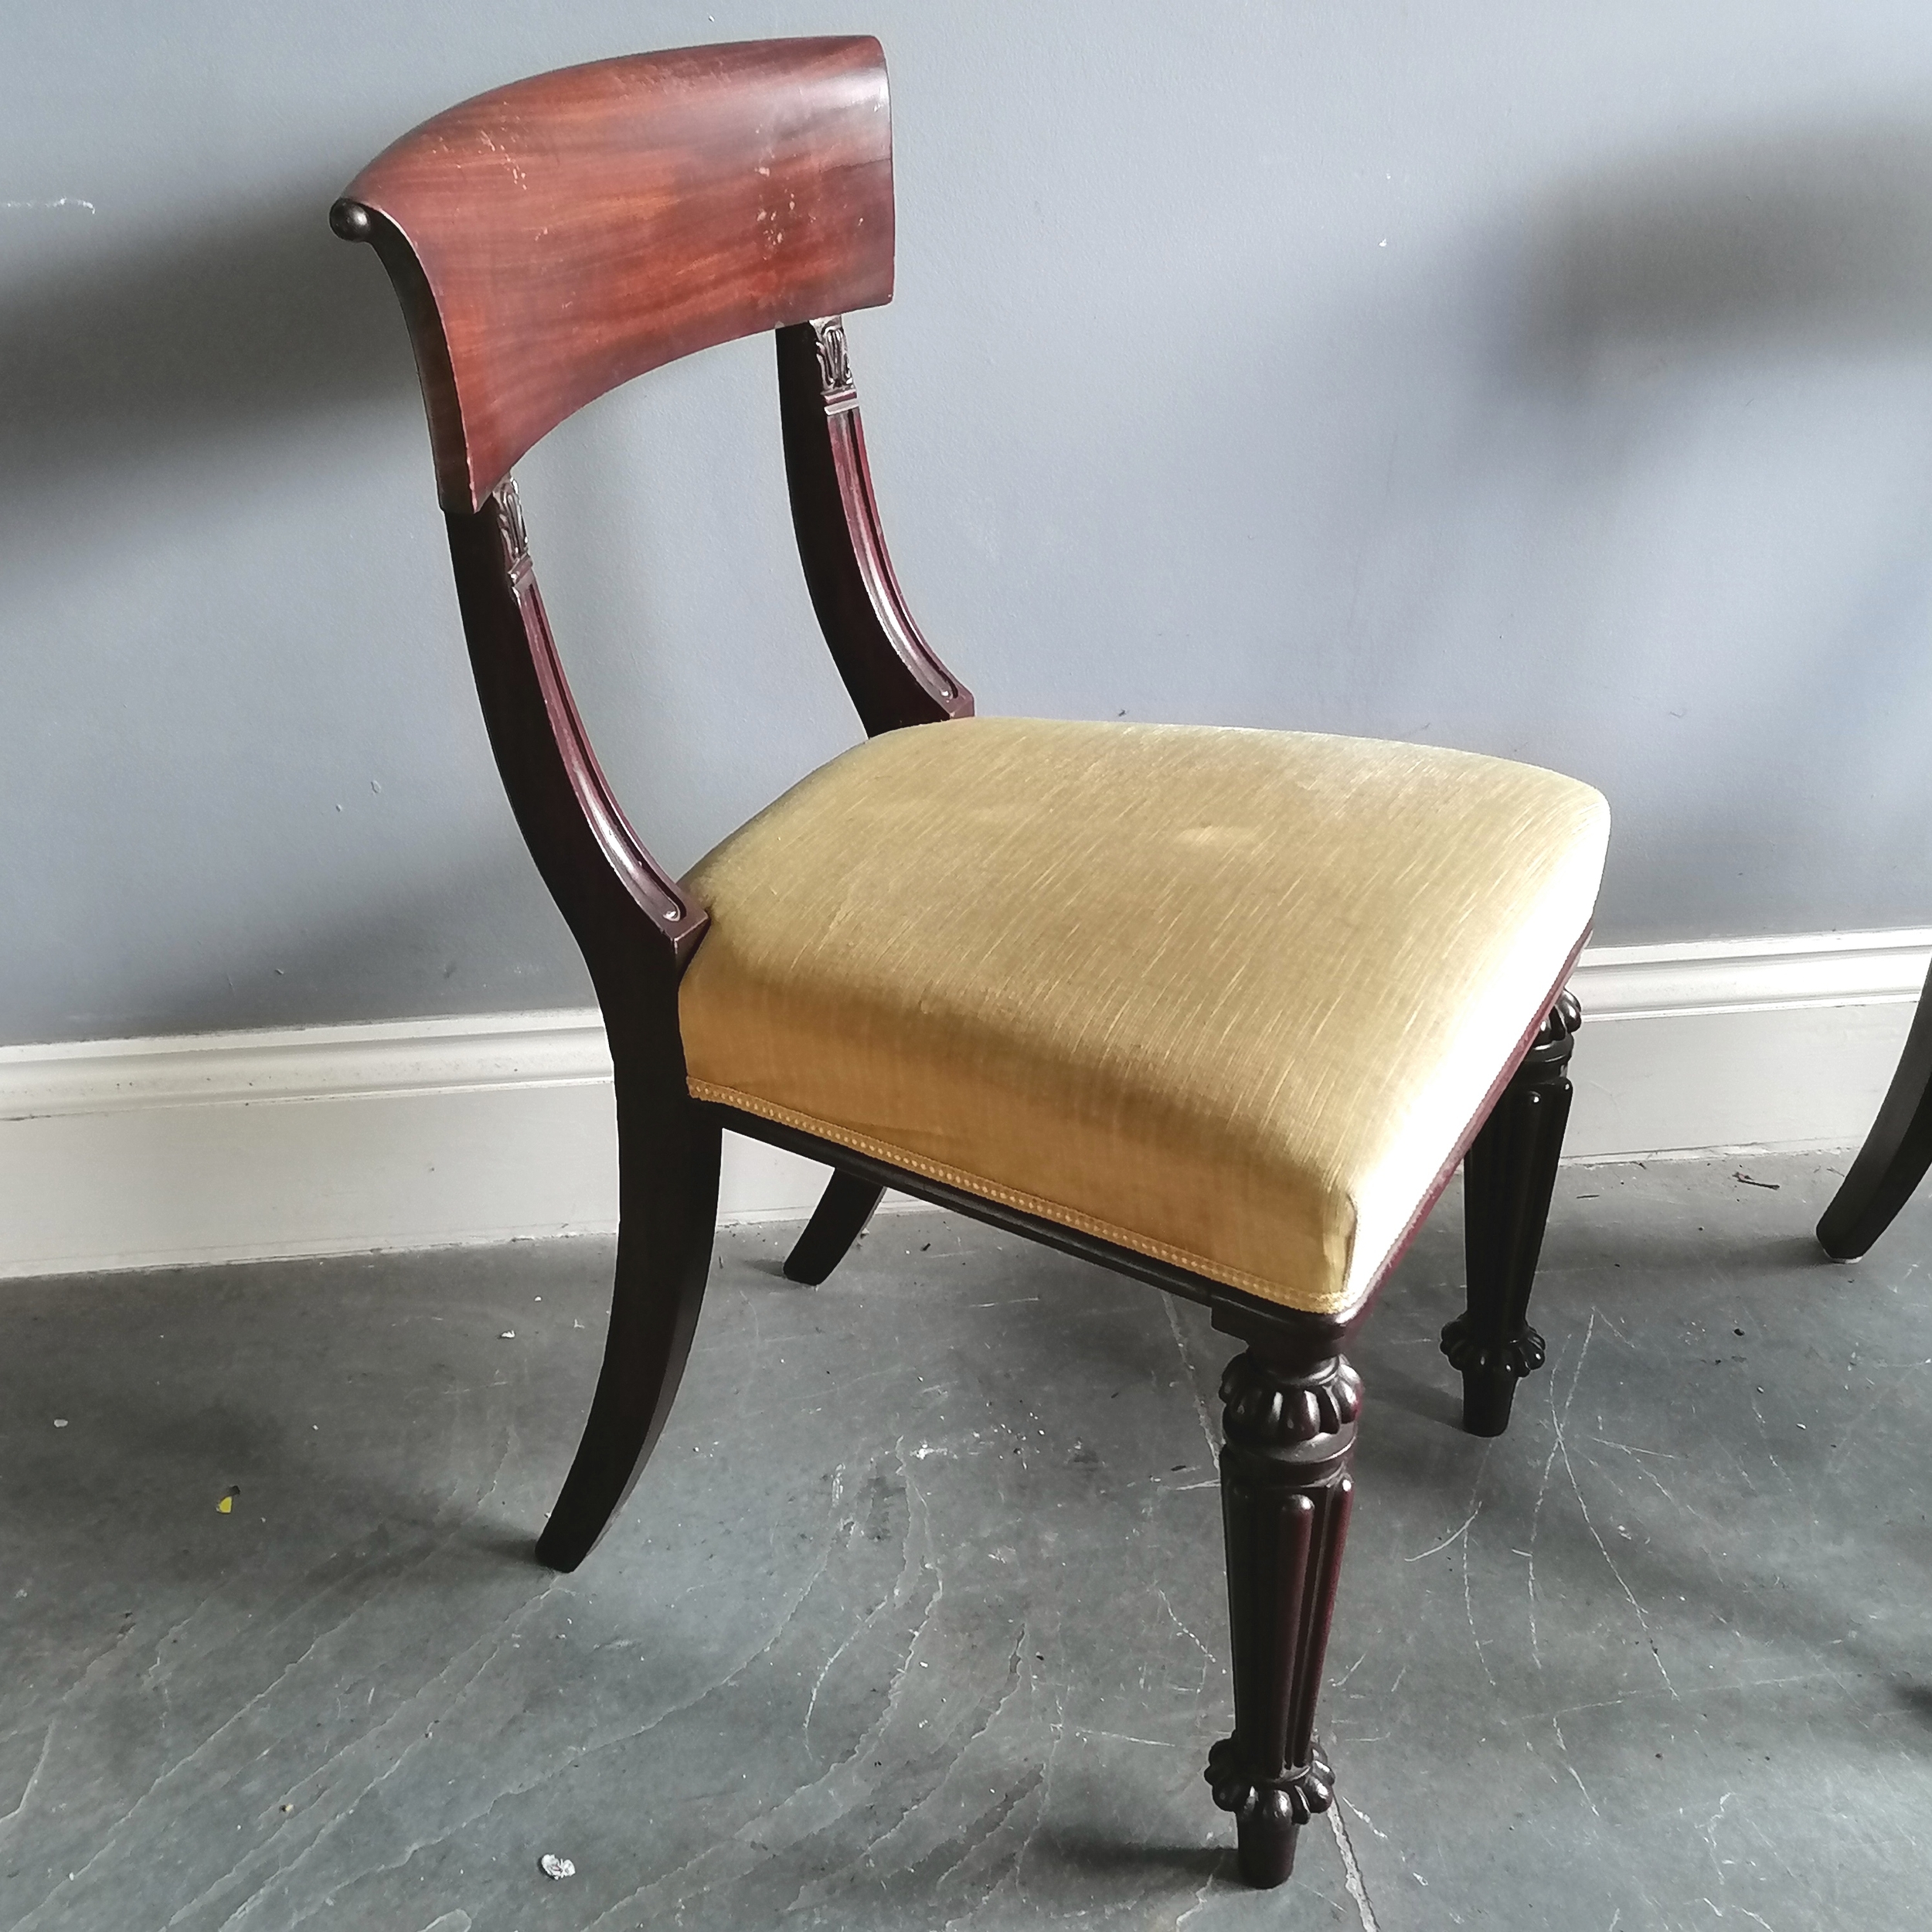 Set of 6 antique rosewood bar back dining chairs with upholstered seats 85cm high x 48cm wide x 43cm - Image 5 of 5